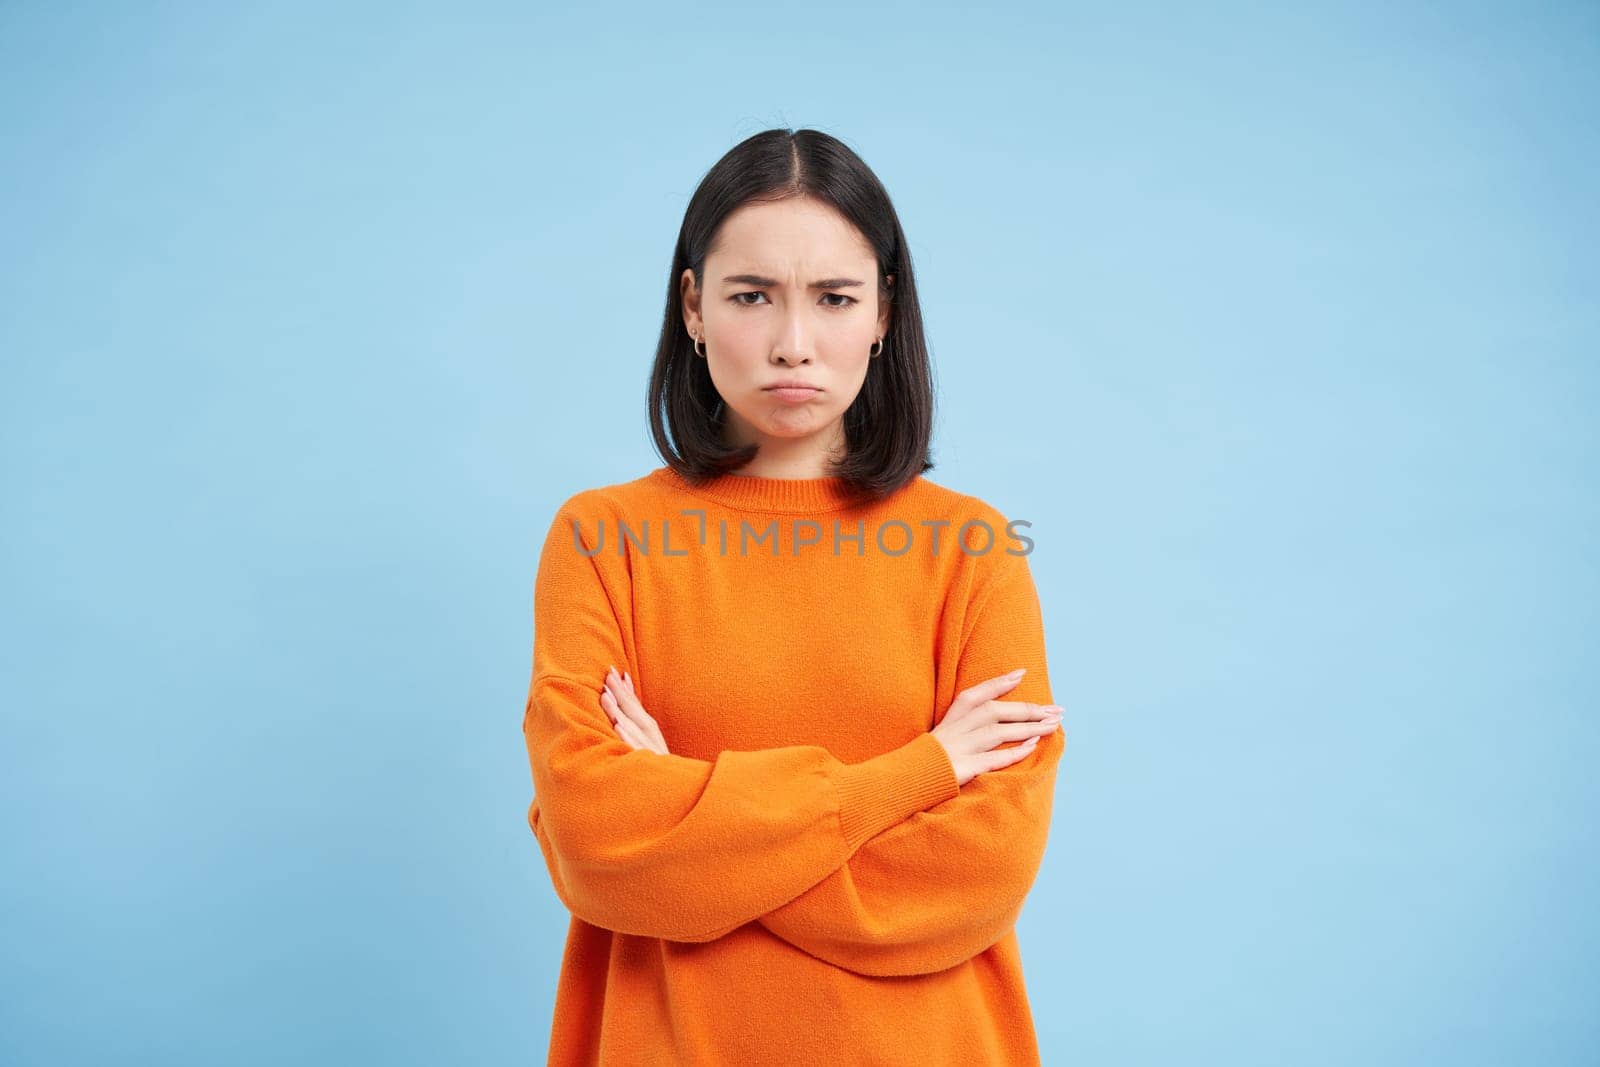 Defensive asian woman shuts herself from conversation, cross hands on chest, sulks and frowns with angry face, stands over blue background